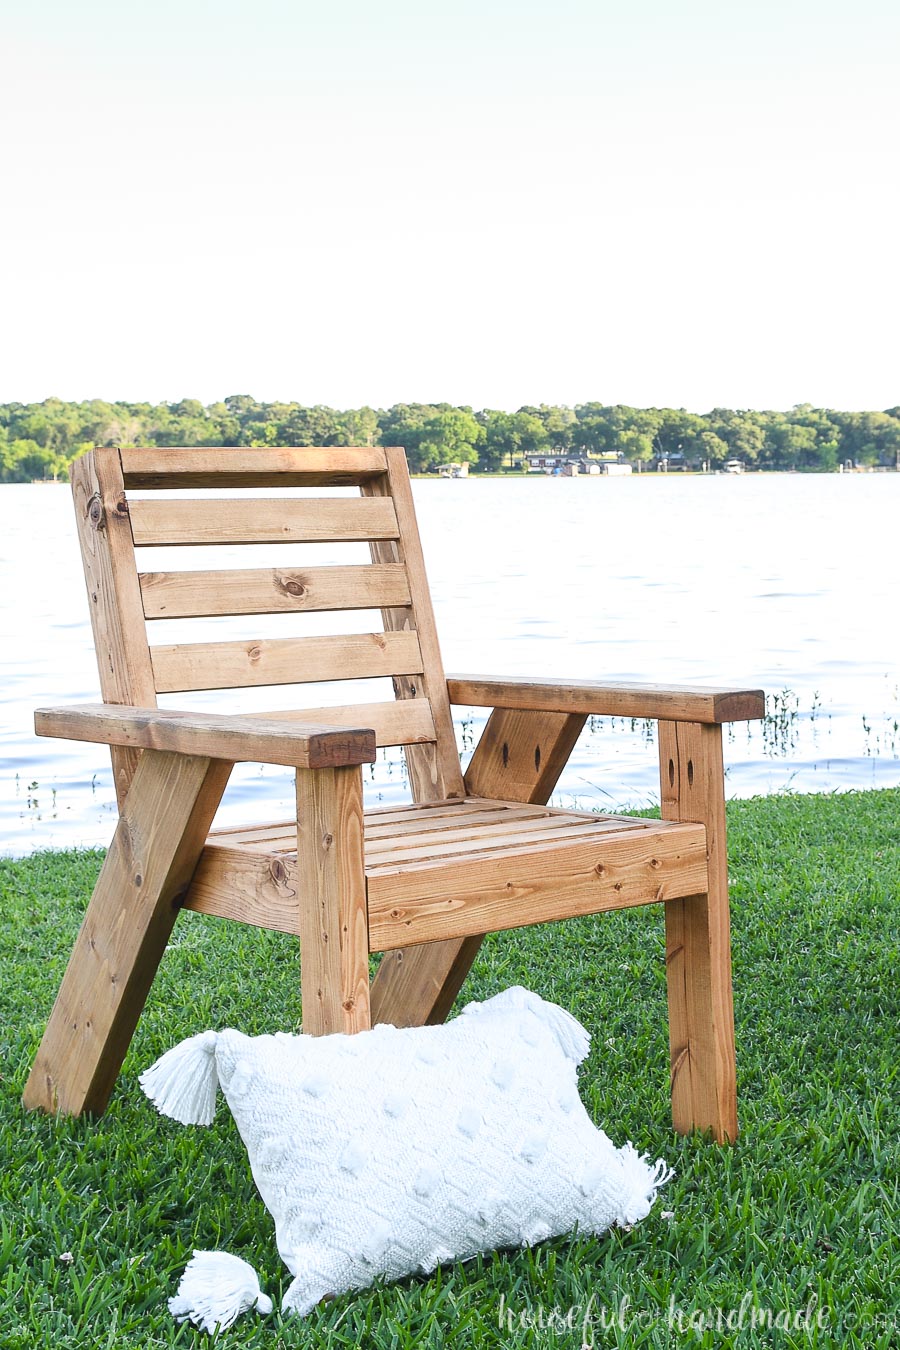 Outdoor Lounge Chair Woodworking Plans - Houseful of Handmade